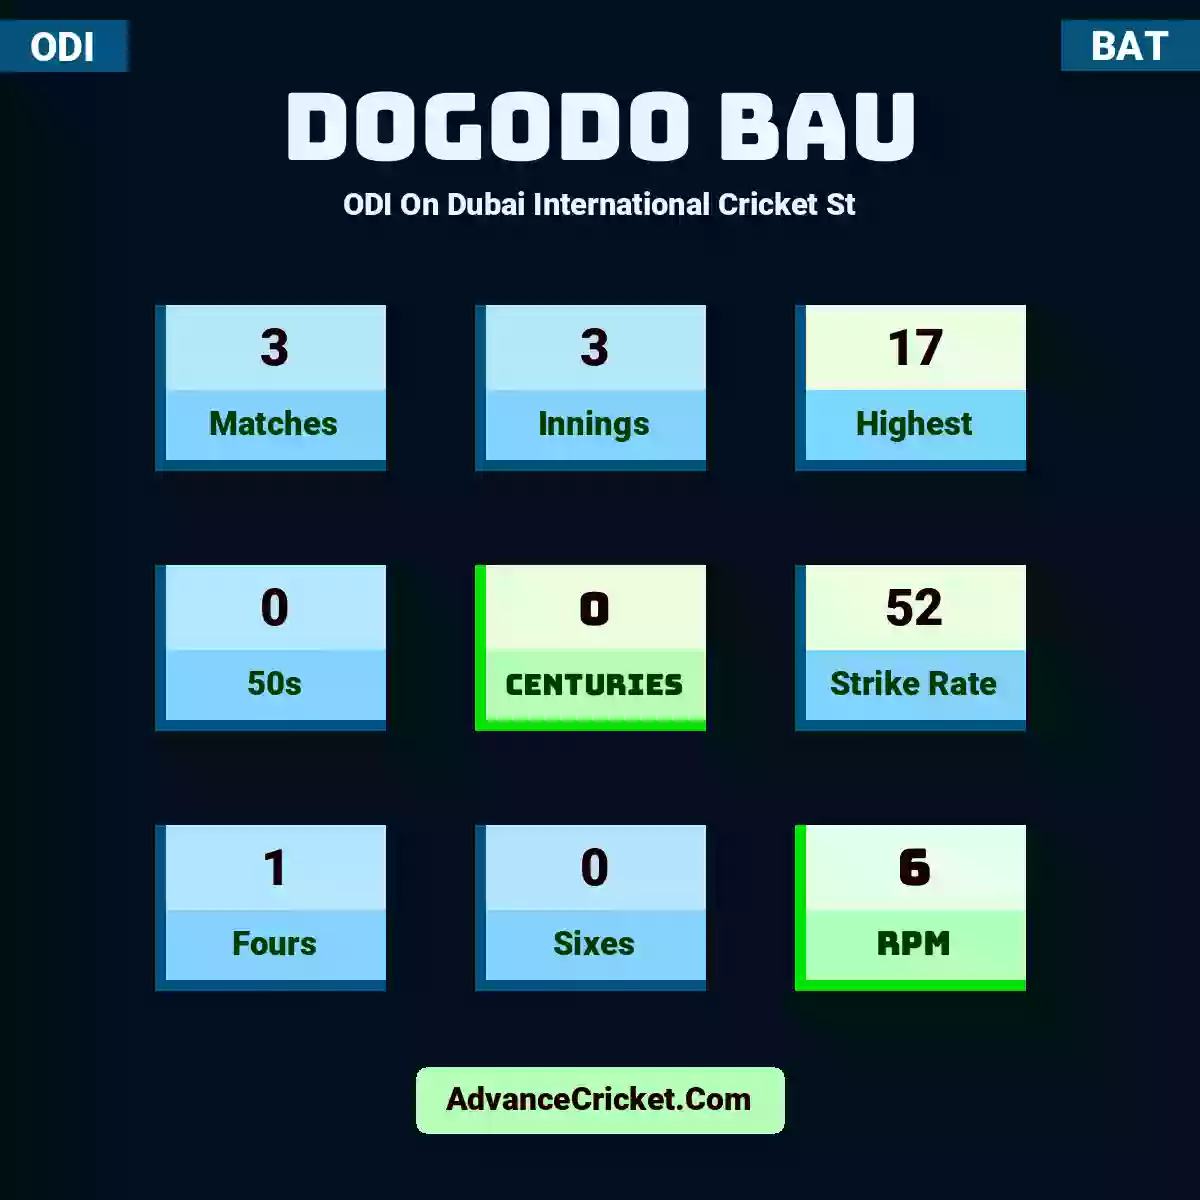 Dogodo Bau ODI  On Dubai International Cricket St, Dogodo Bau played 3 matches, scored 17 runs as highest, 0 half-centuries, and 0 centuries, with a strike rate of 52. D.Bau hit 1 fours and 0 sixes, with an RPM of 6.